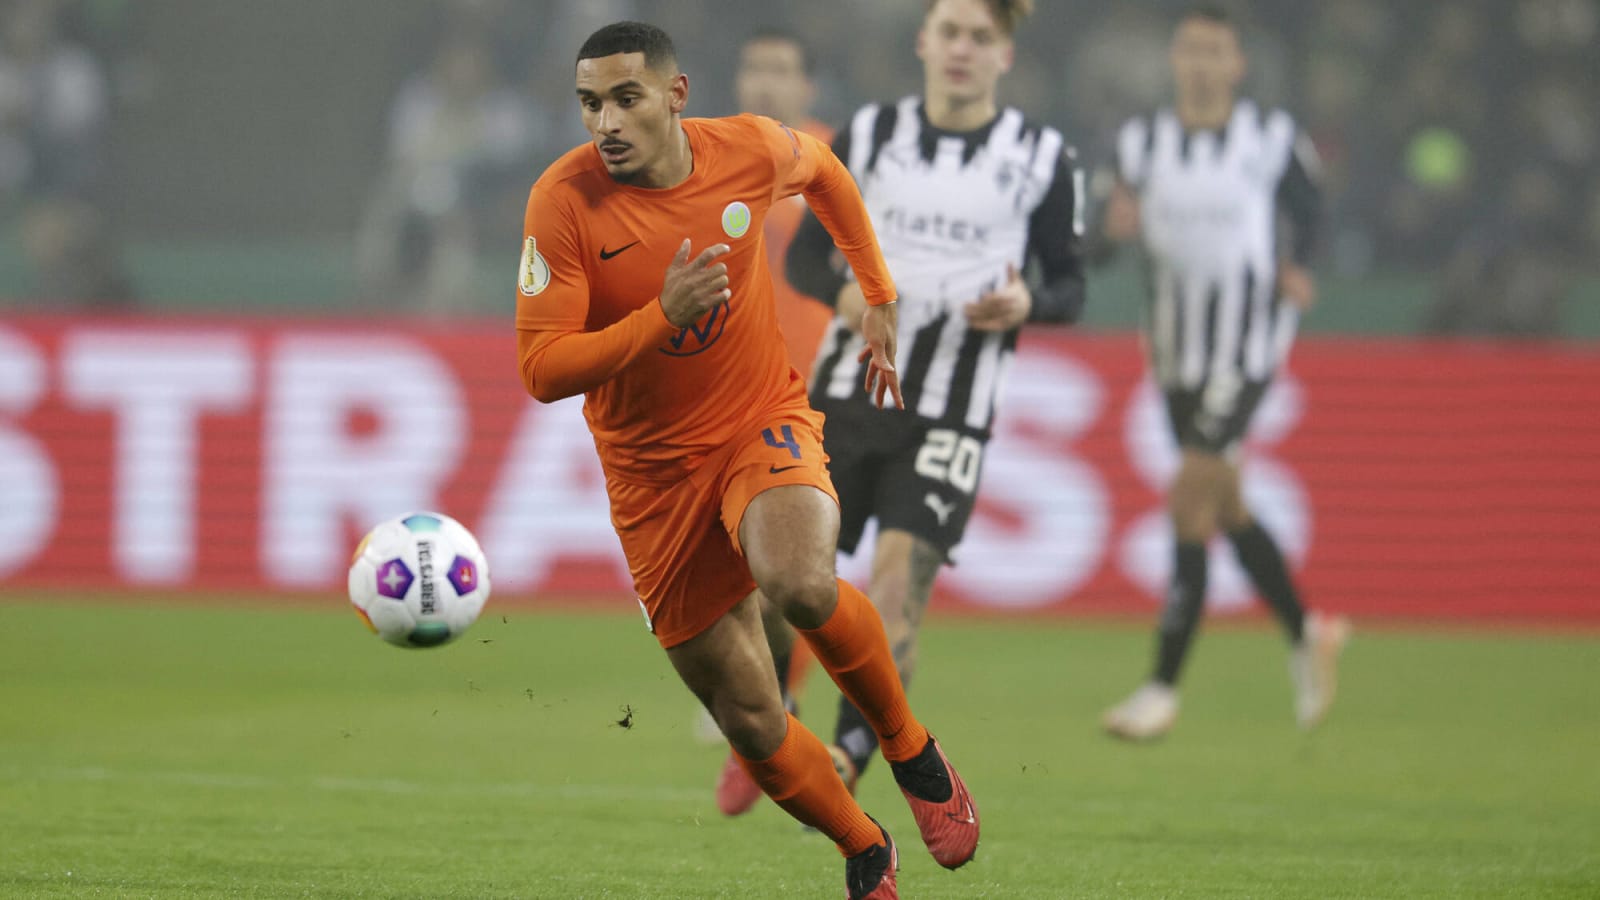 Liverpool Eyeing Potential Move For £25 Million ‘Defensive Rock’ To Replace Injured Joel Matip